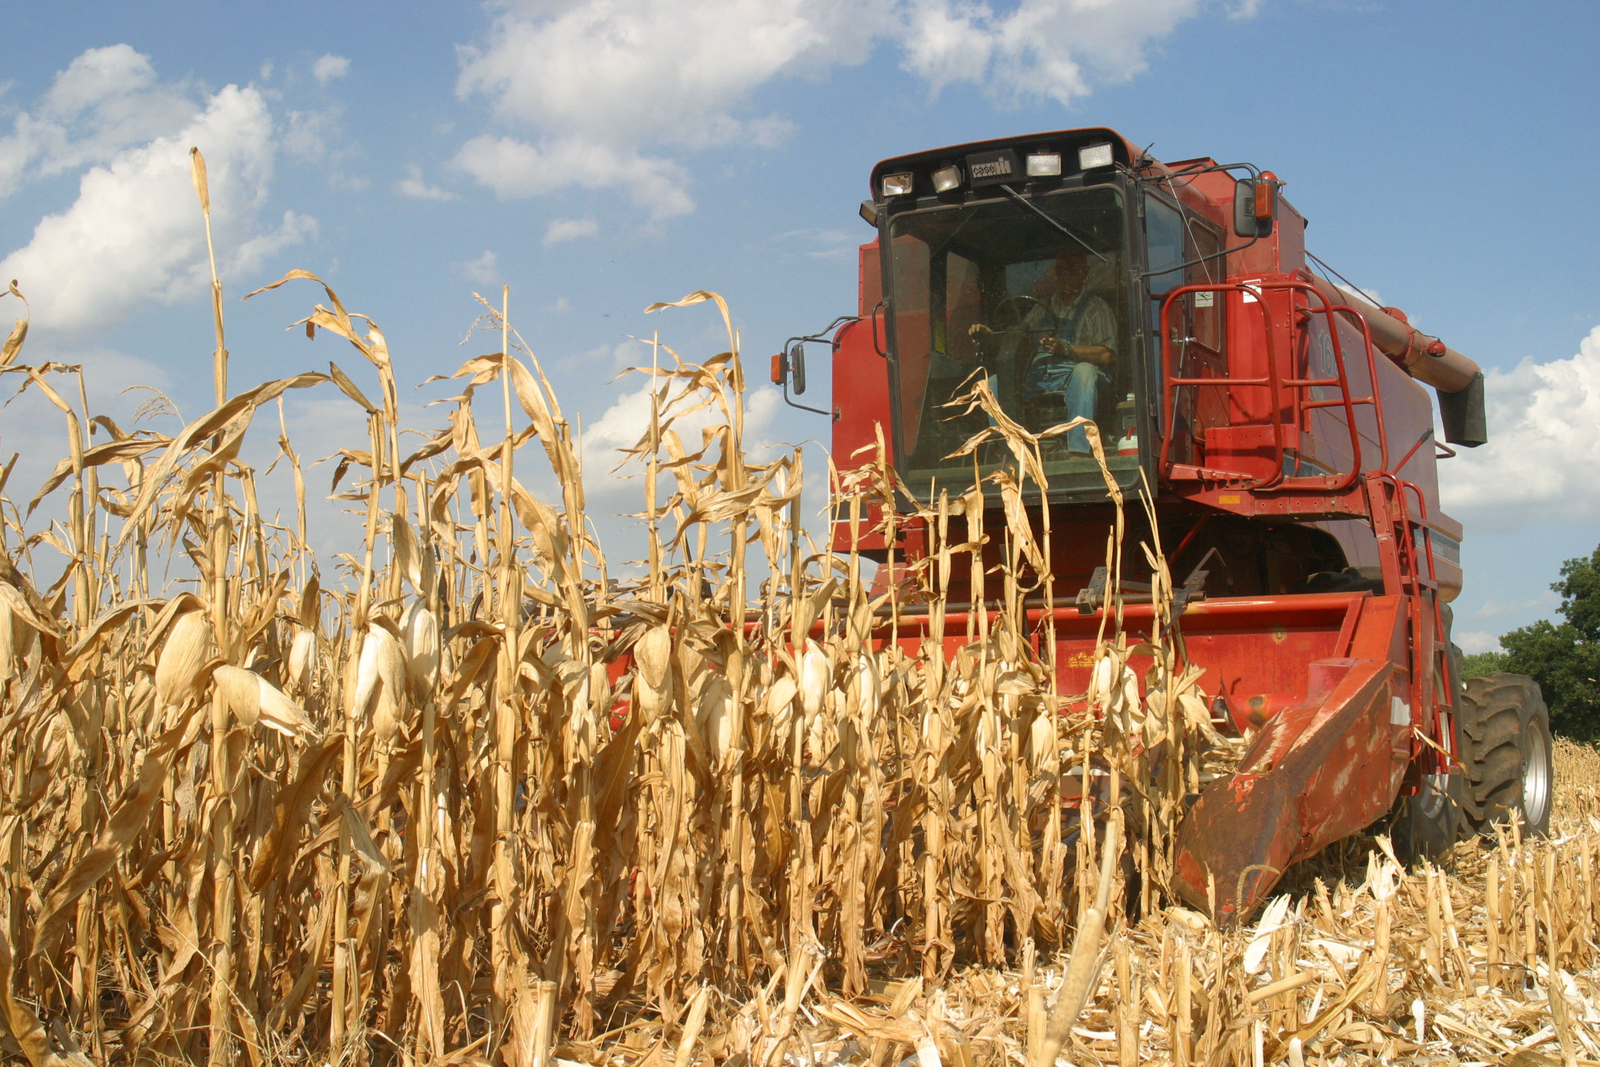 Heat in Europe to lower corn output